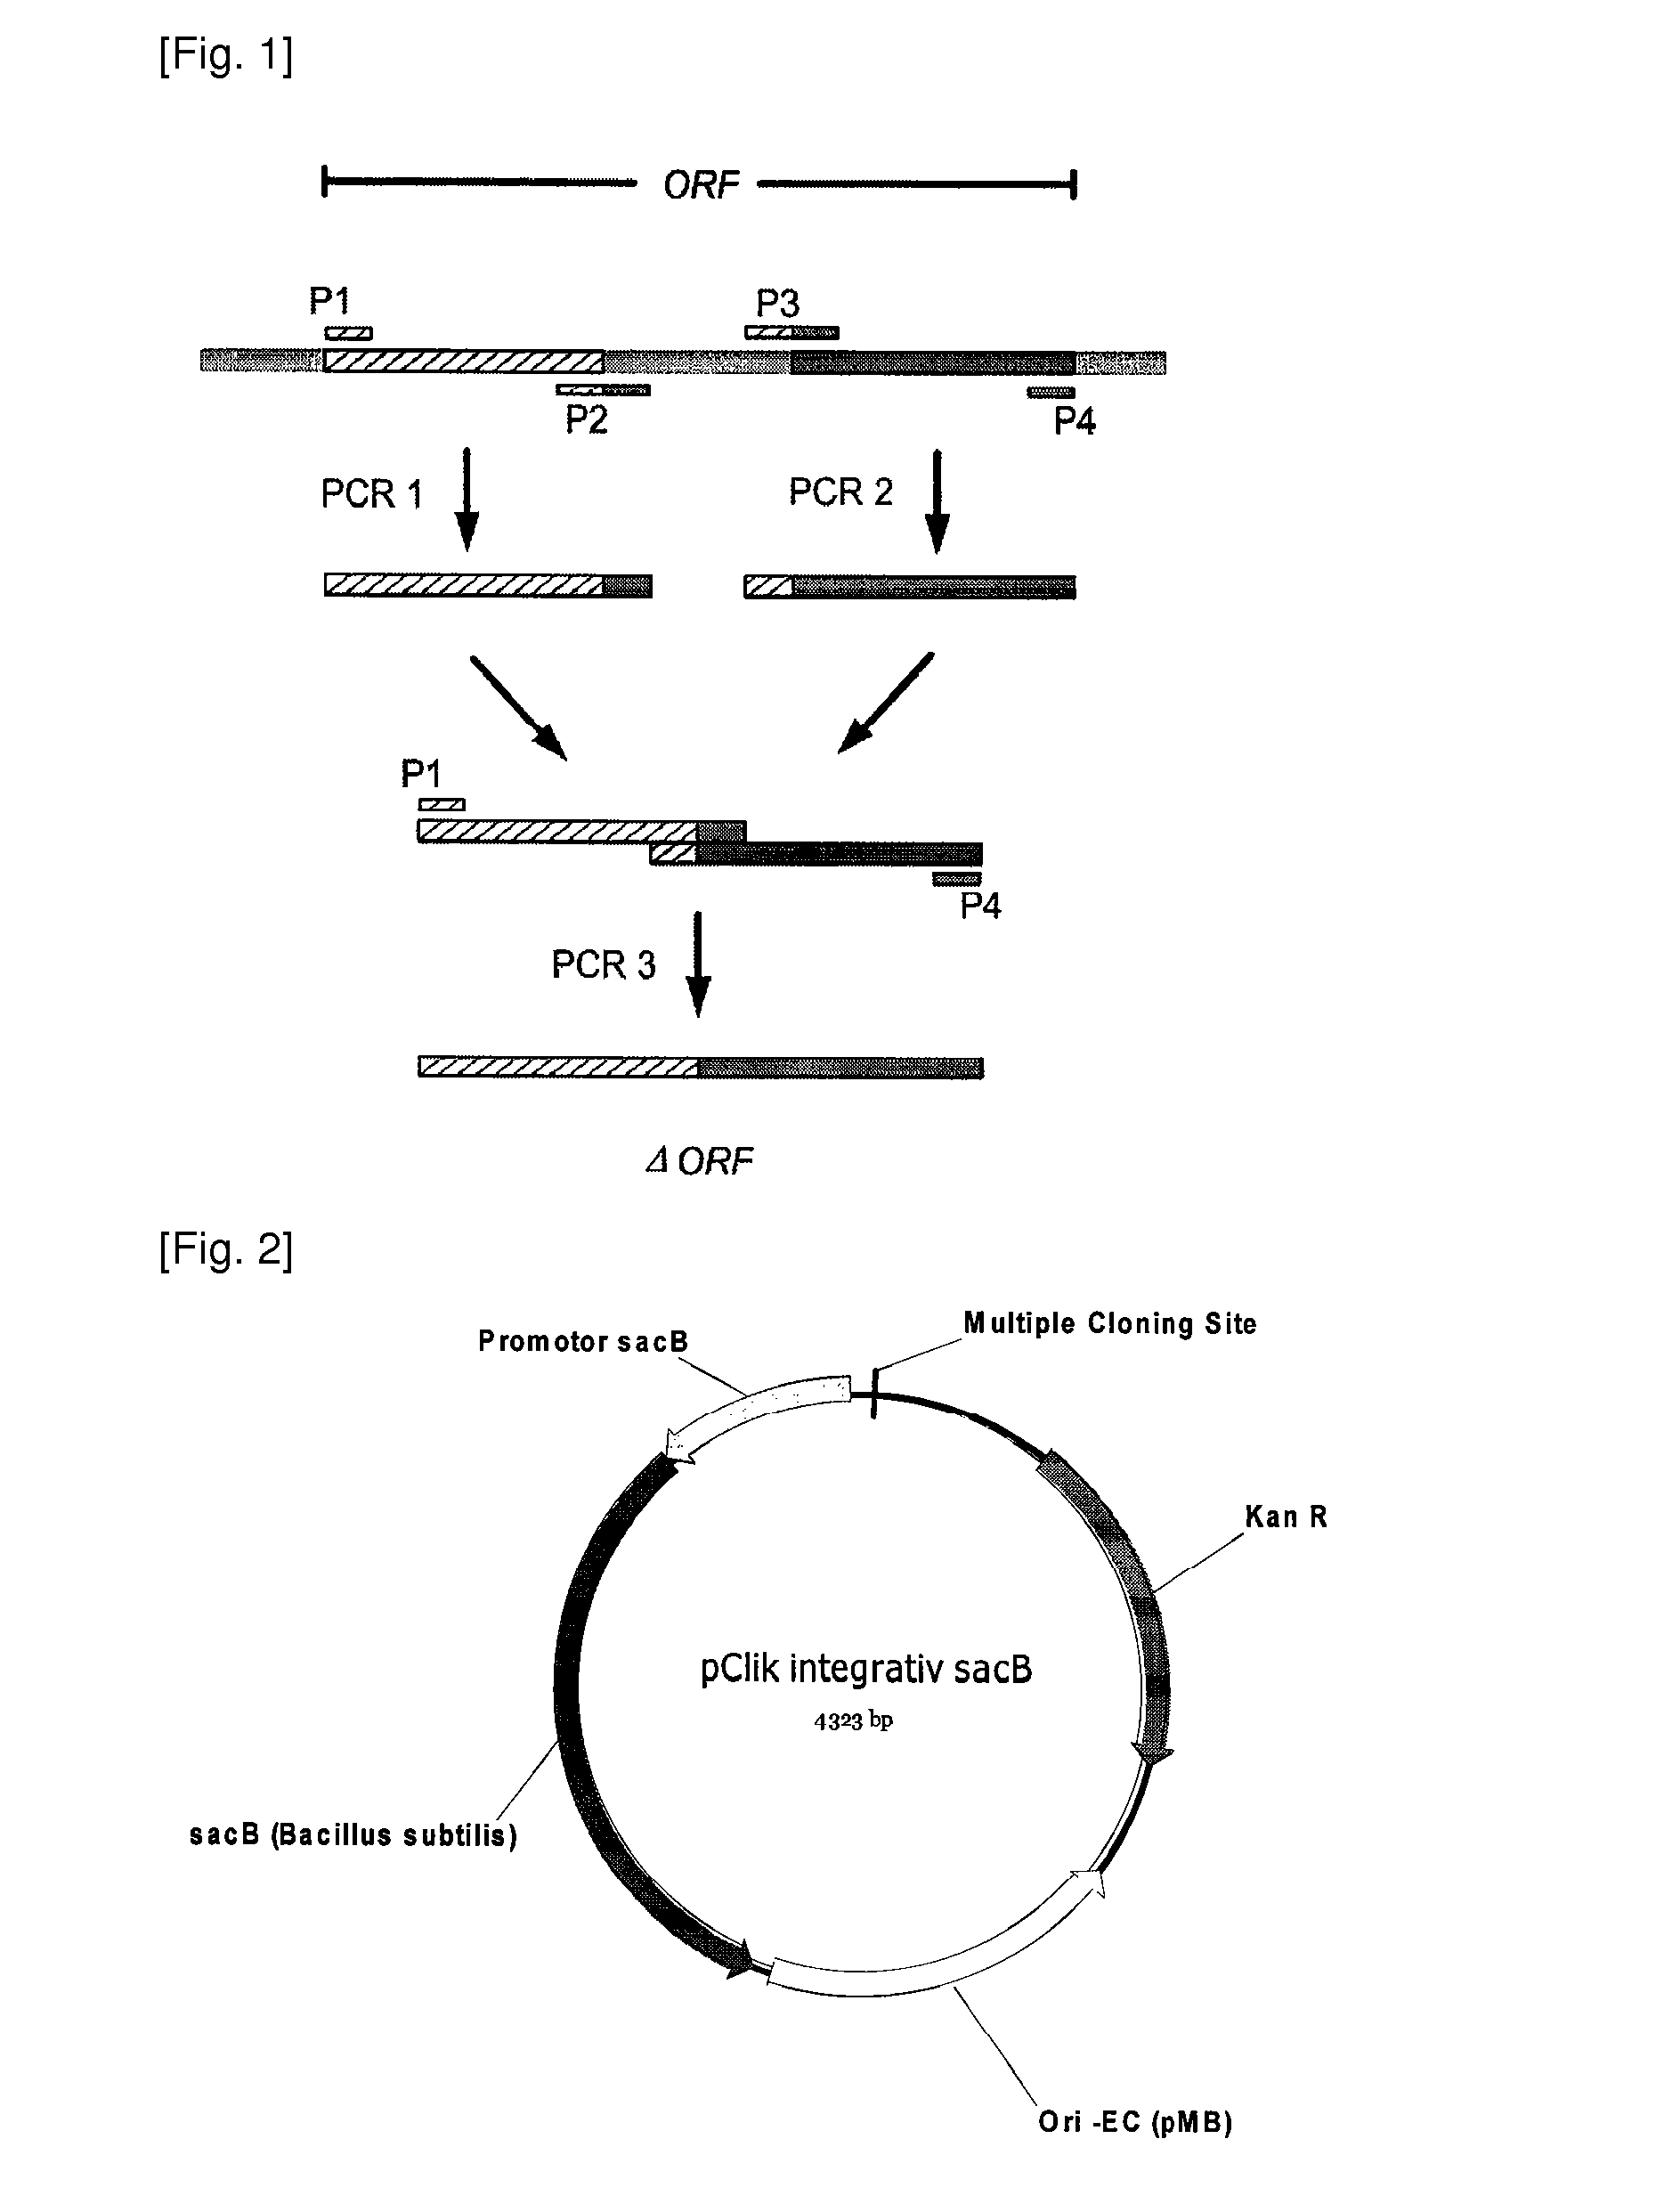 Production process for amino acids of the aspartate family using microorganisms